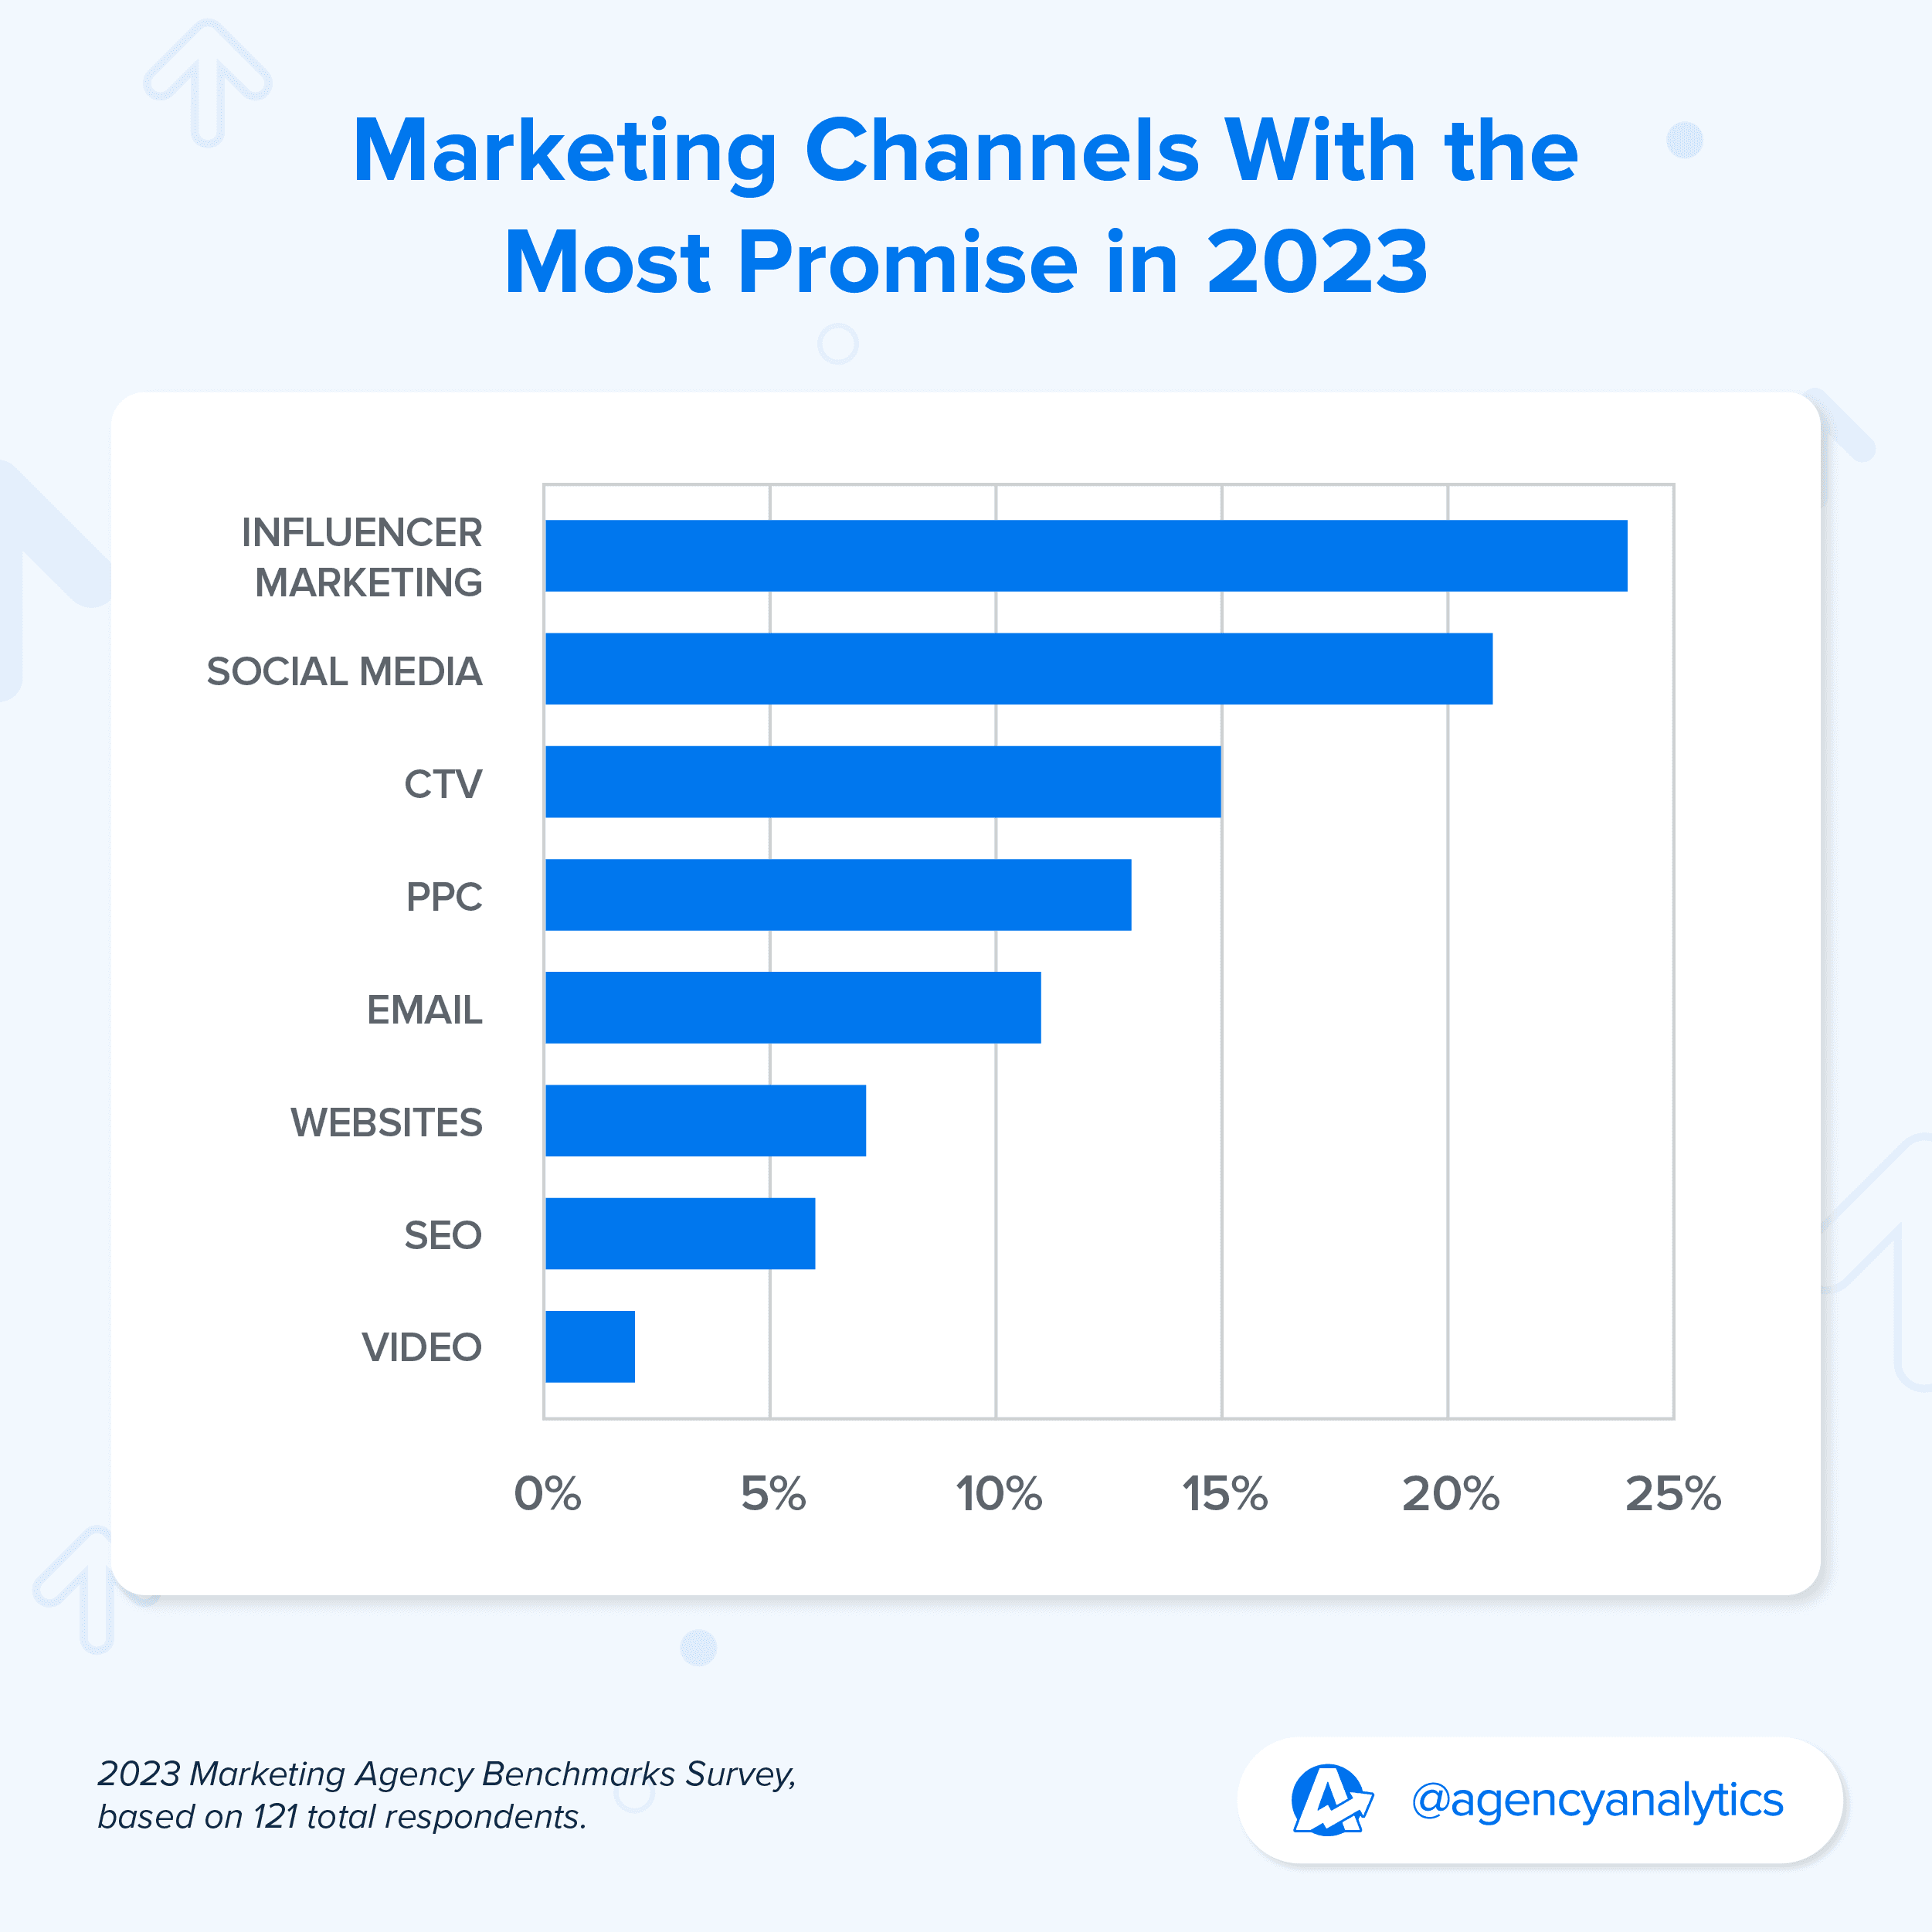 Graph showing the Best Marketing Channels in 2023 according to Marketing Agencies